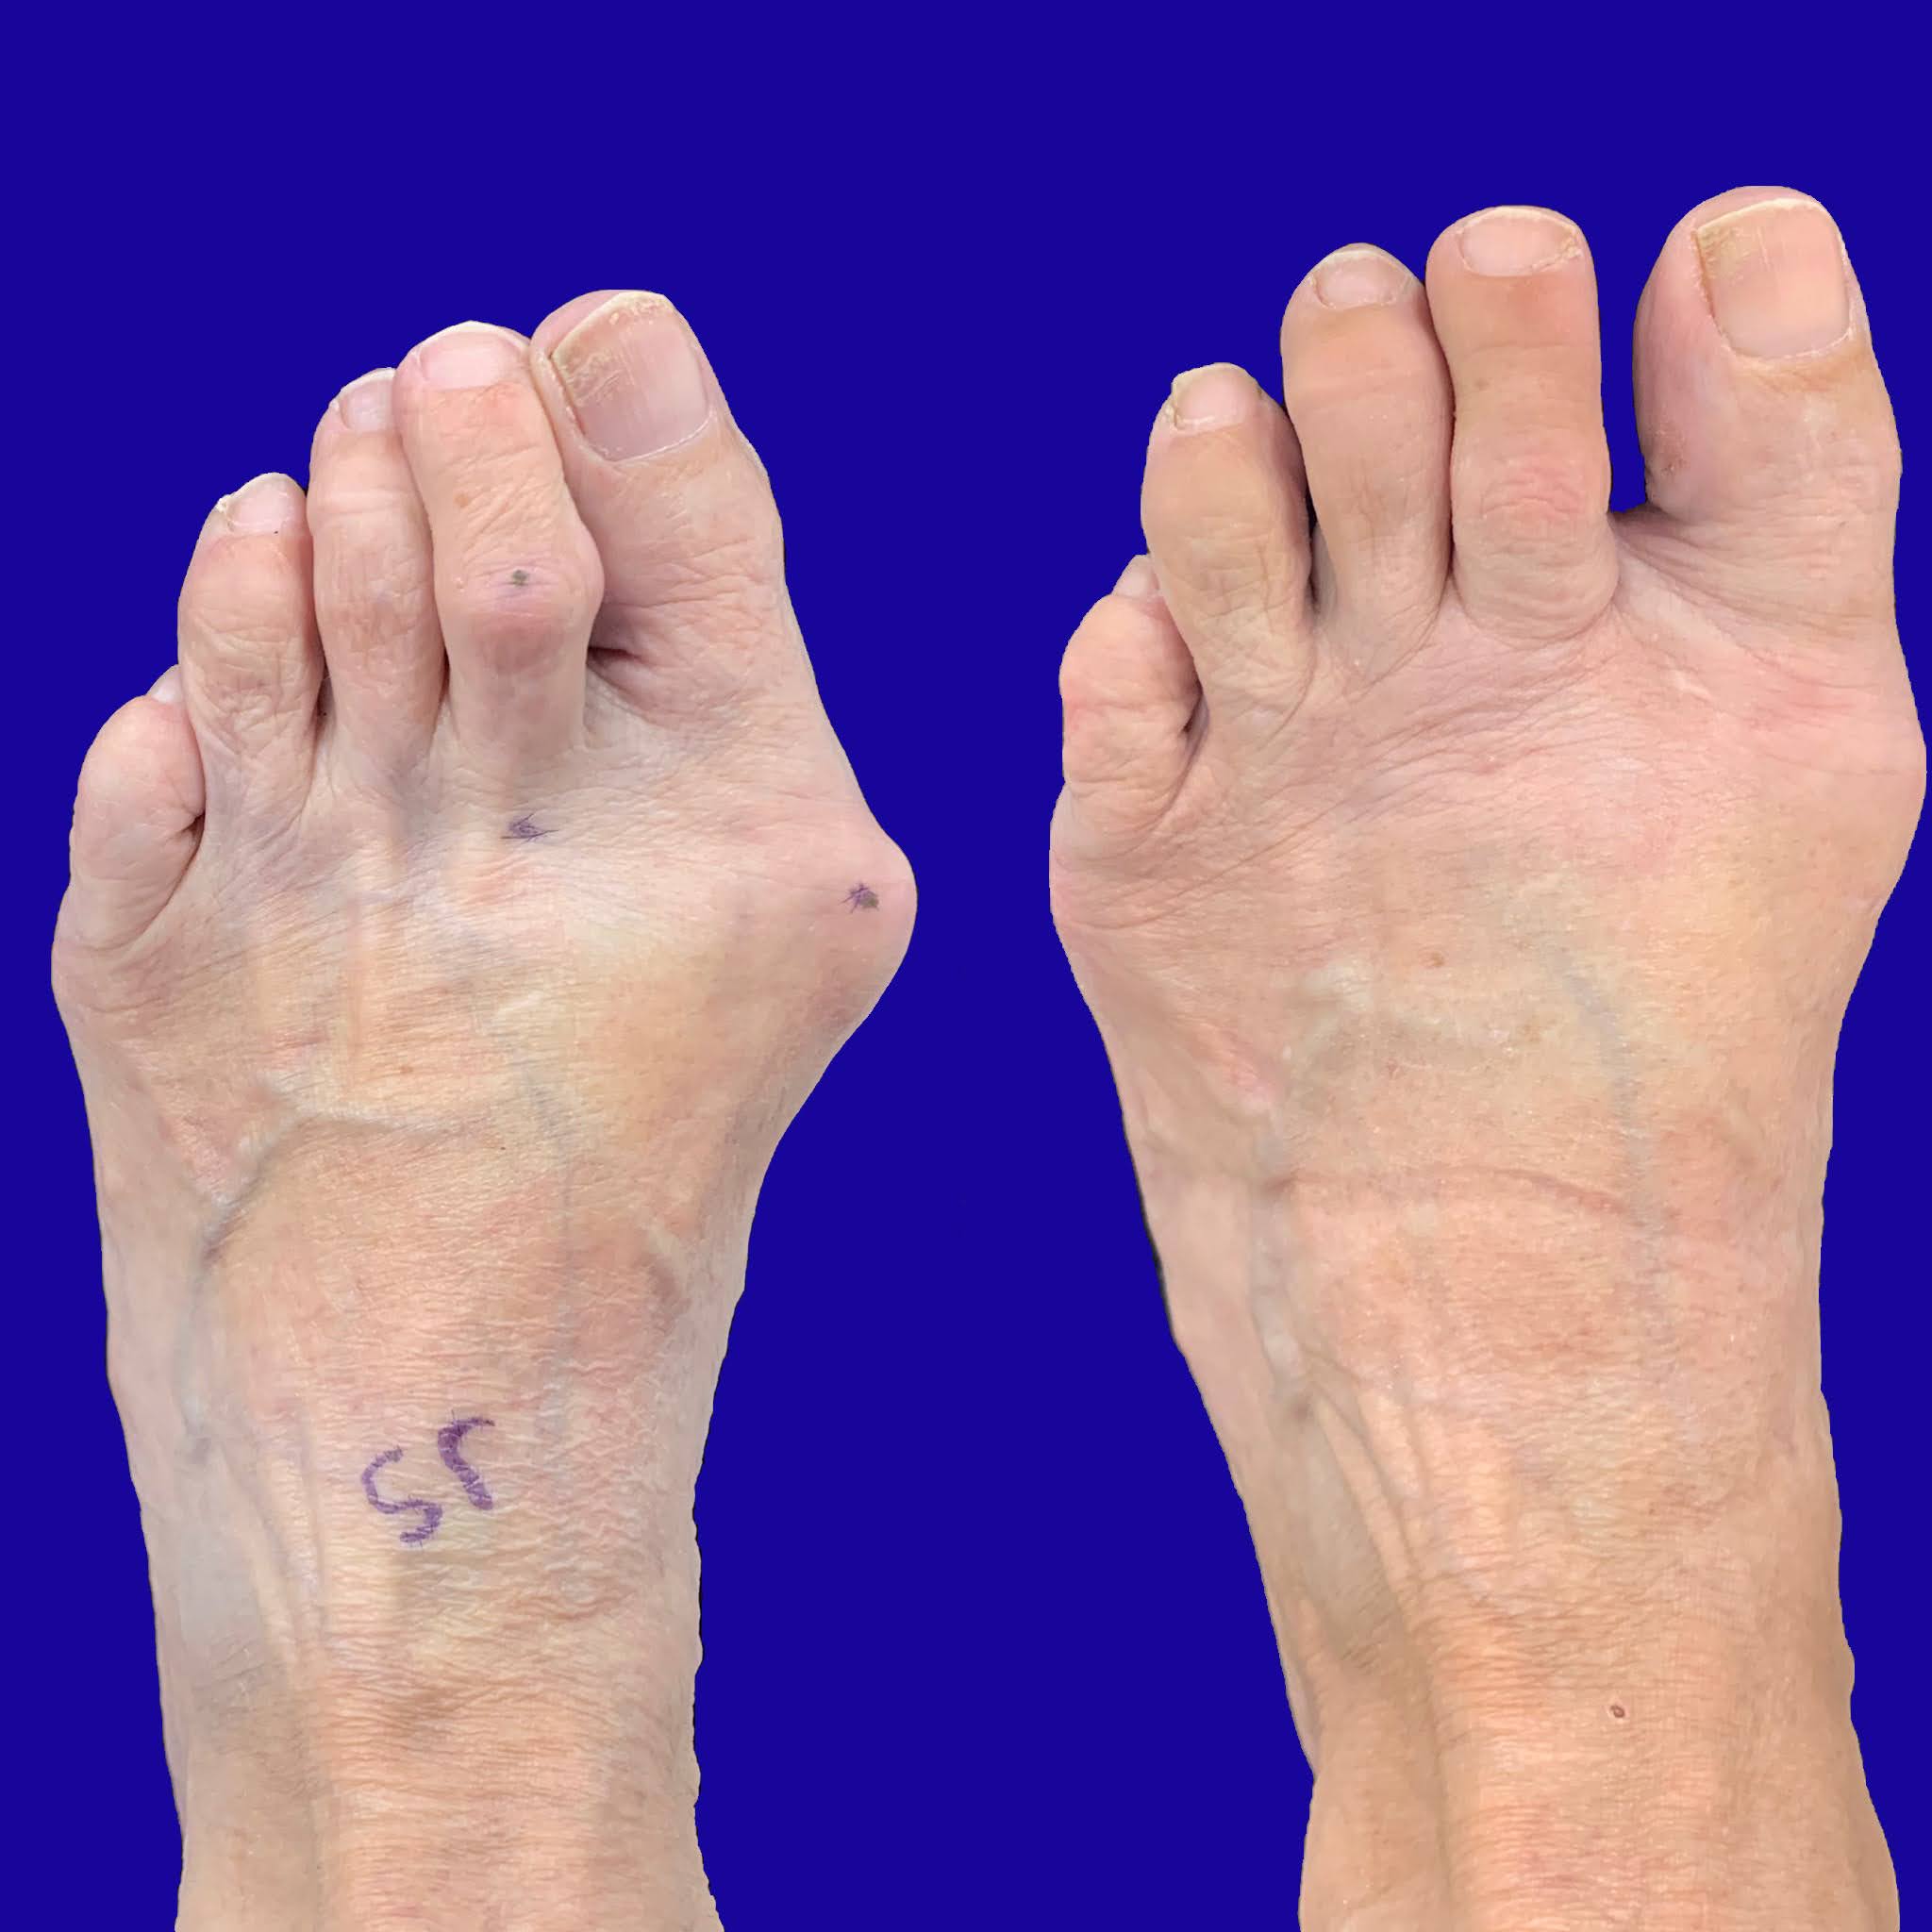 Before and After Bunion Surgery Photos Northwest Surgery Center